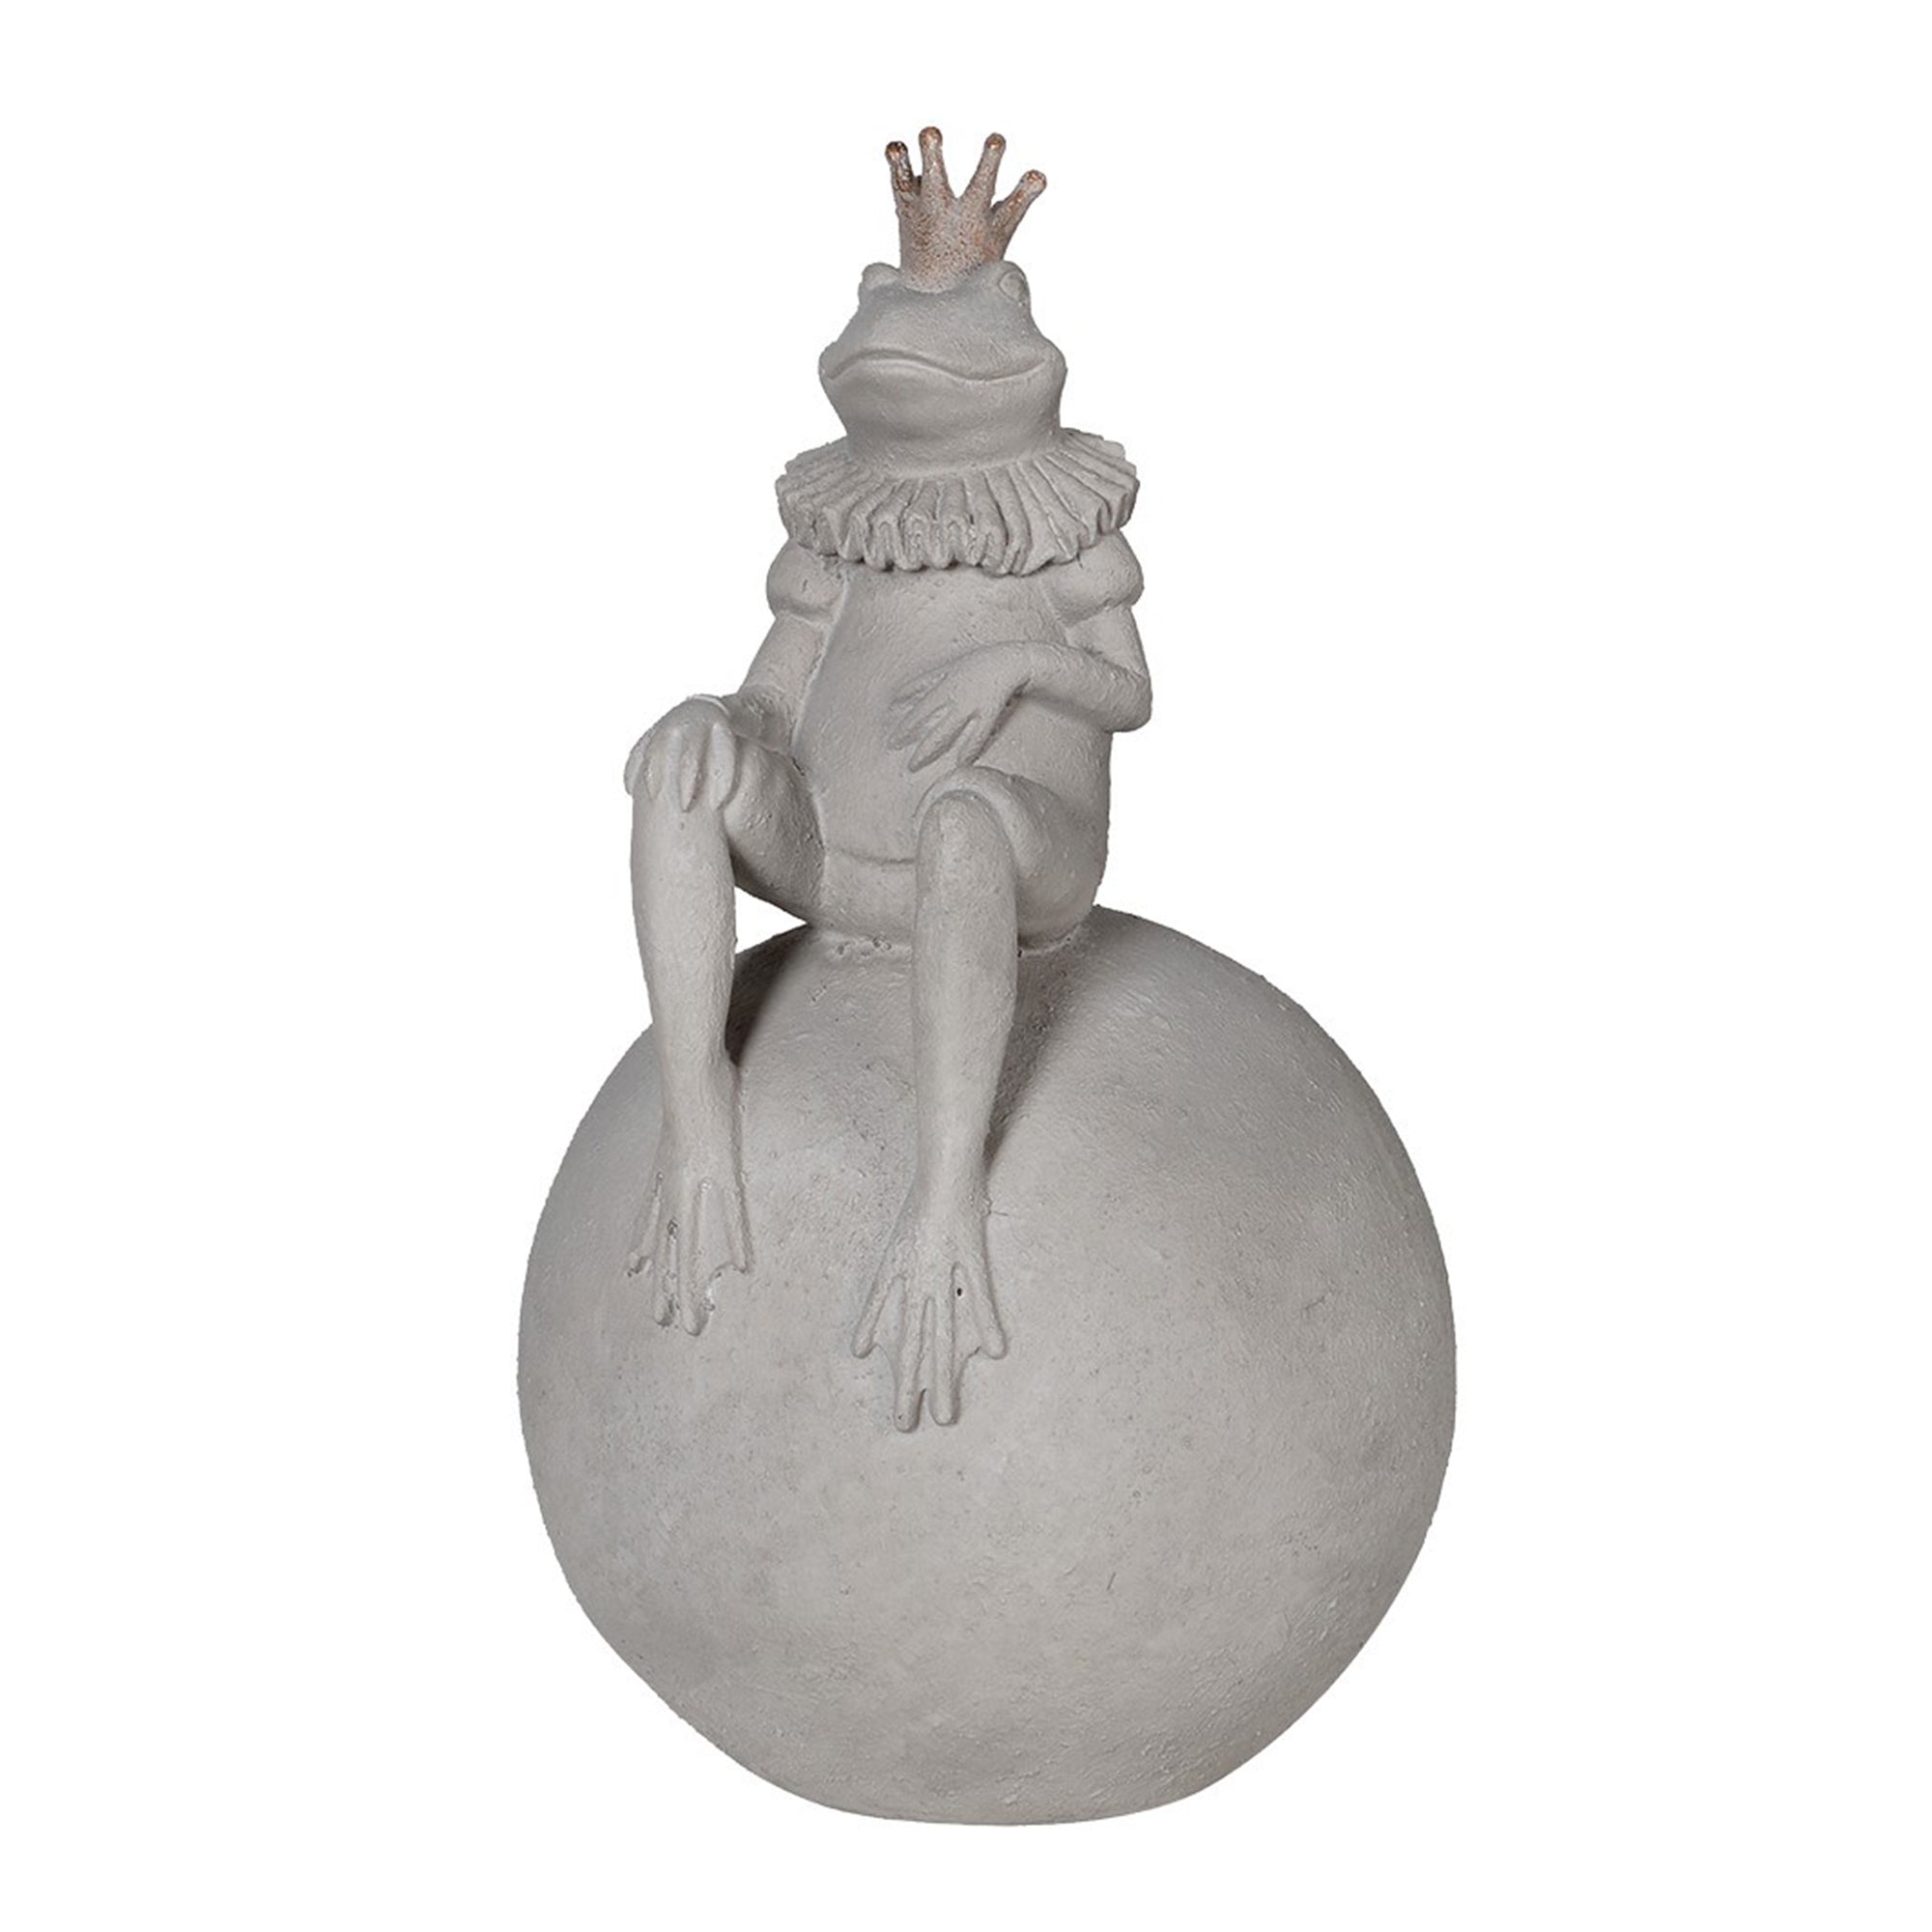 Rory - Frog Sitting On Ball Sculpture